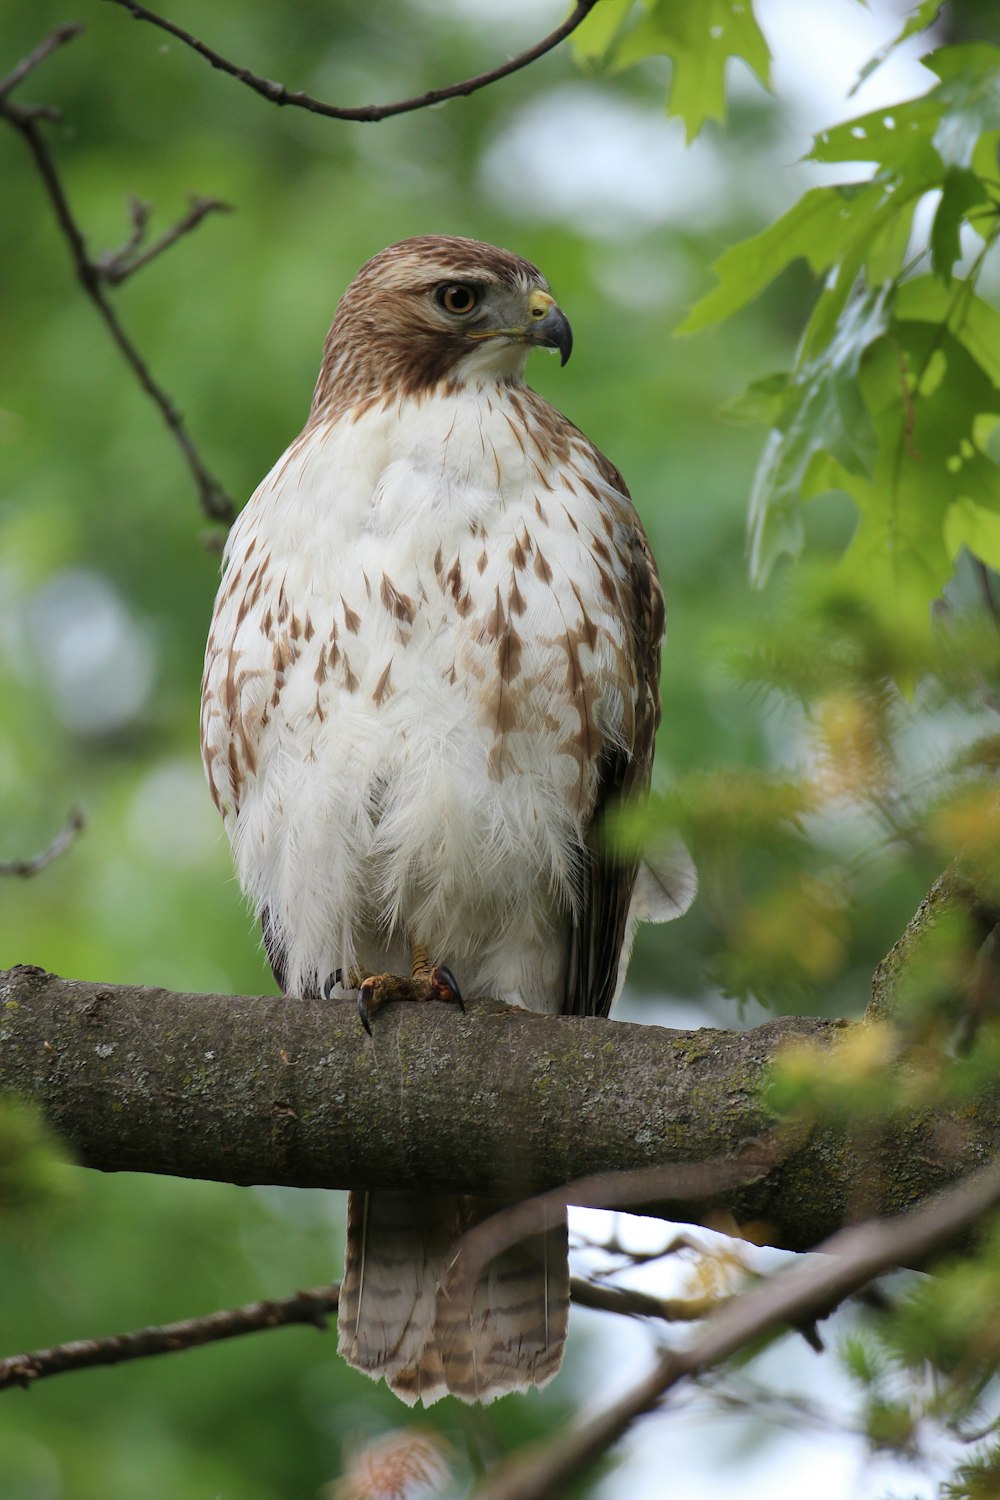 brown and white bird on tree branch during daytime